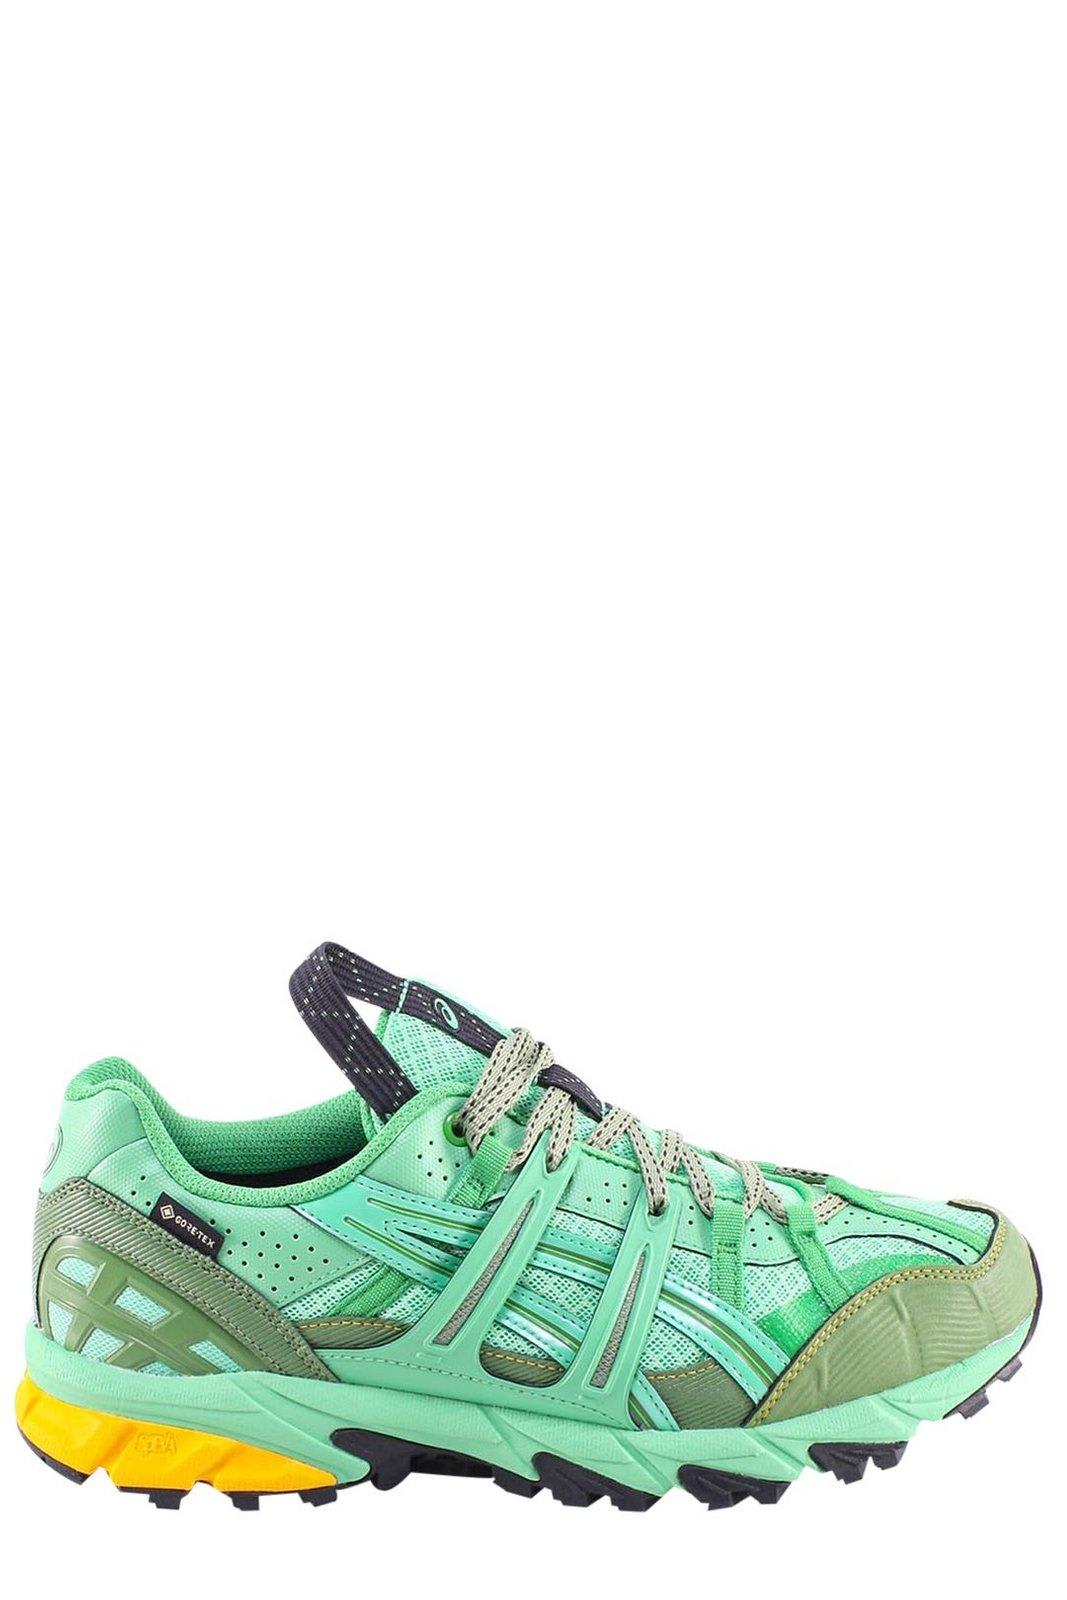 Asics Hs4-s Gel-sonoma Lace-up Sneakers In Green